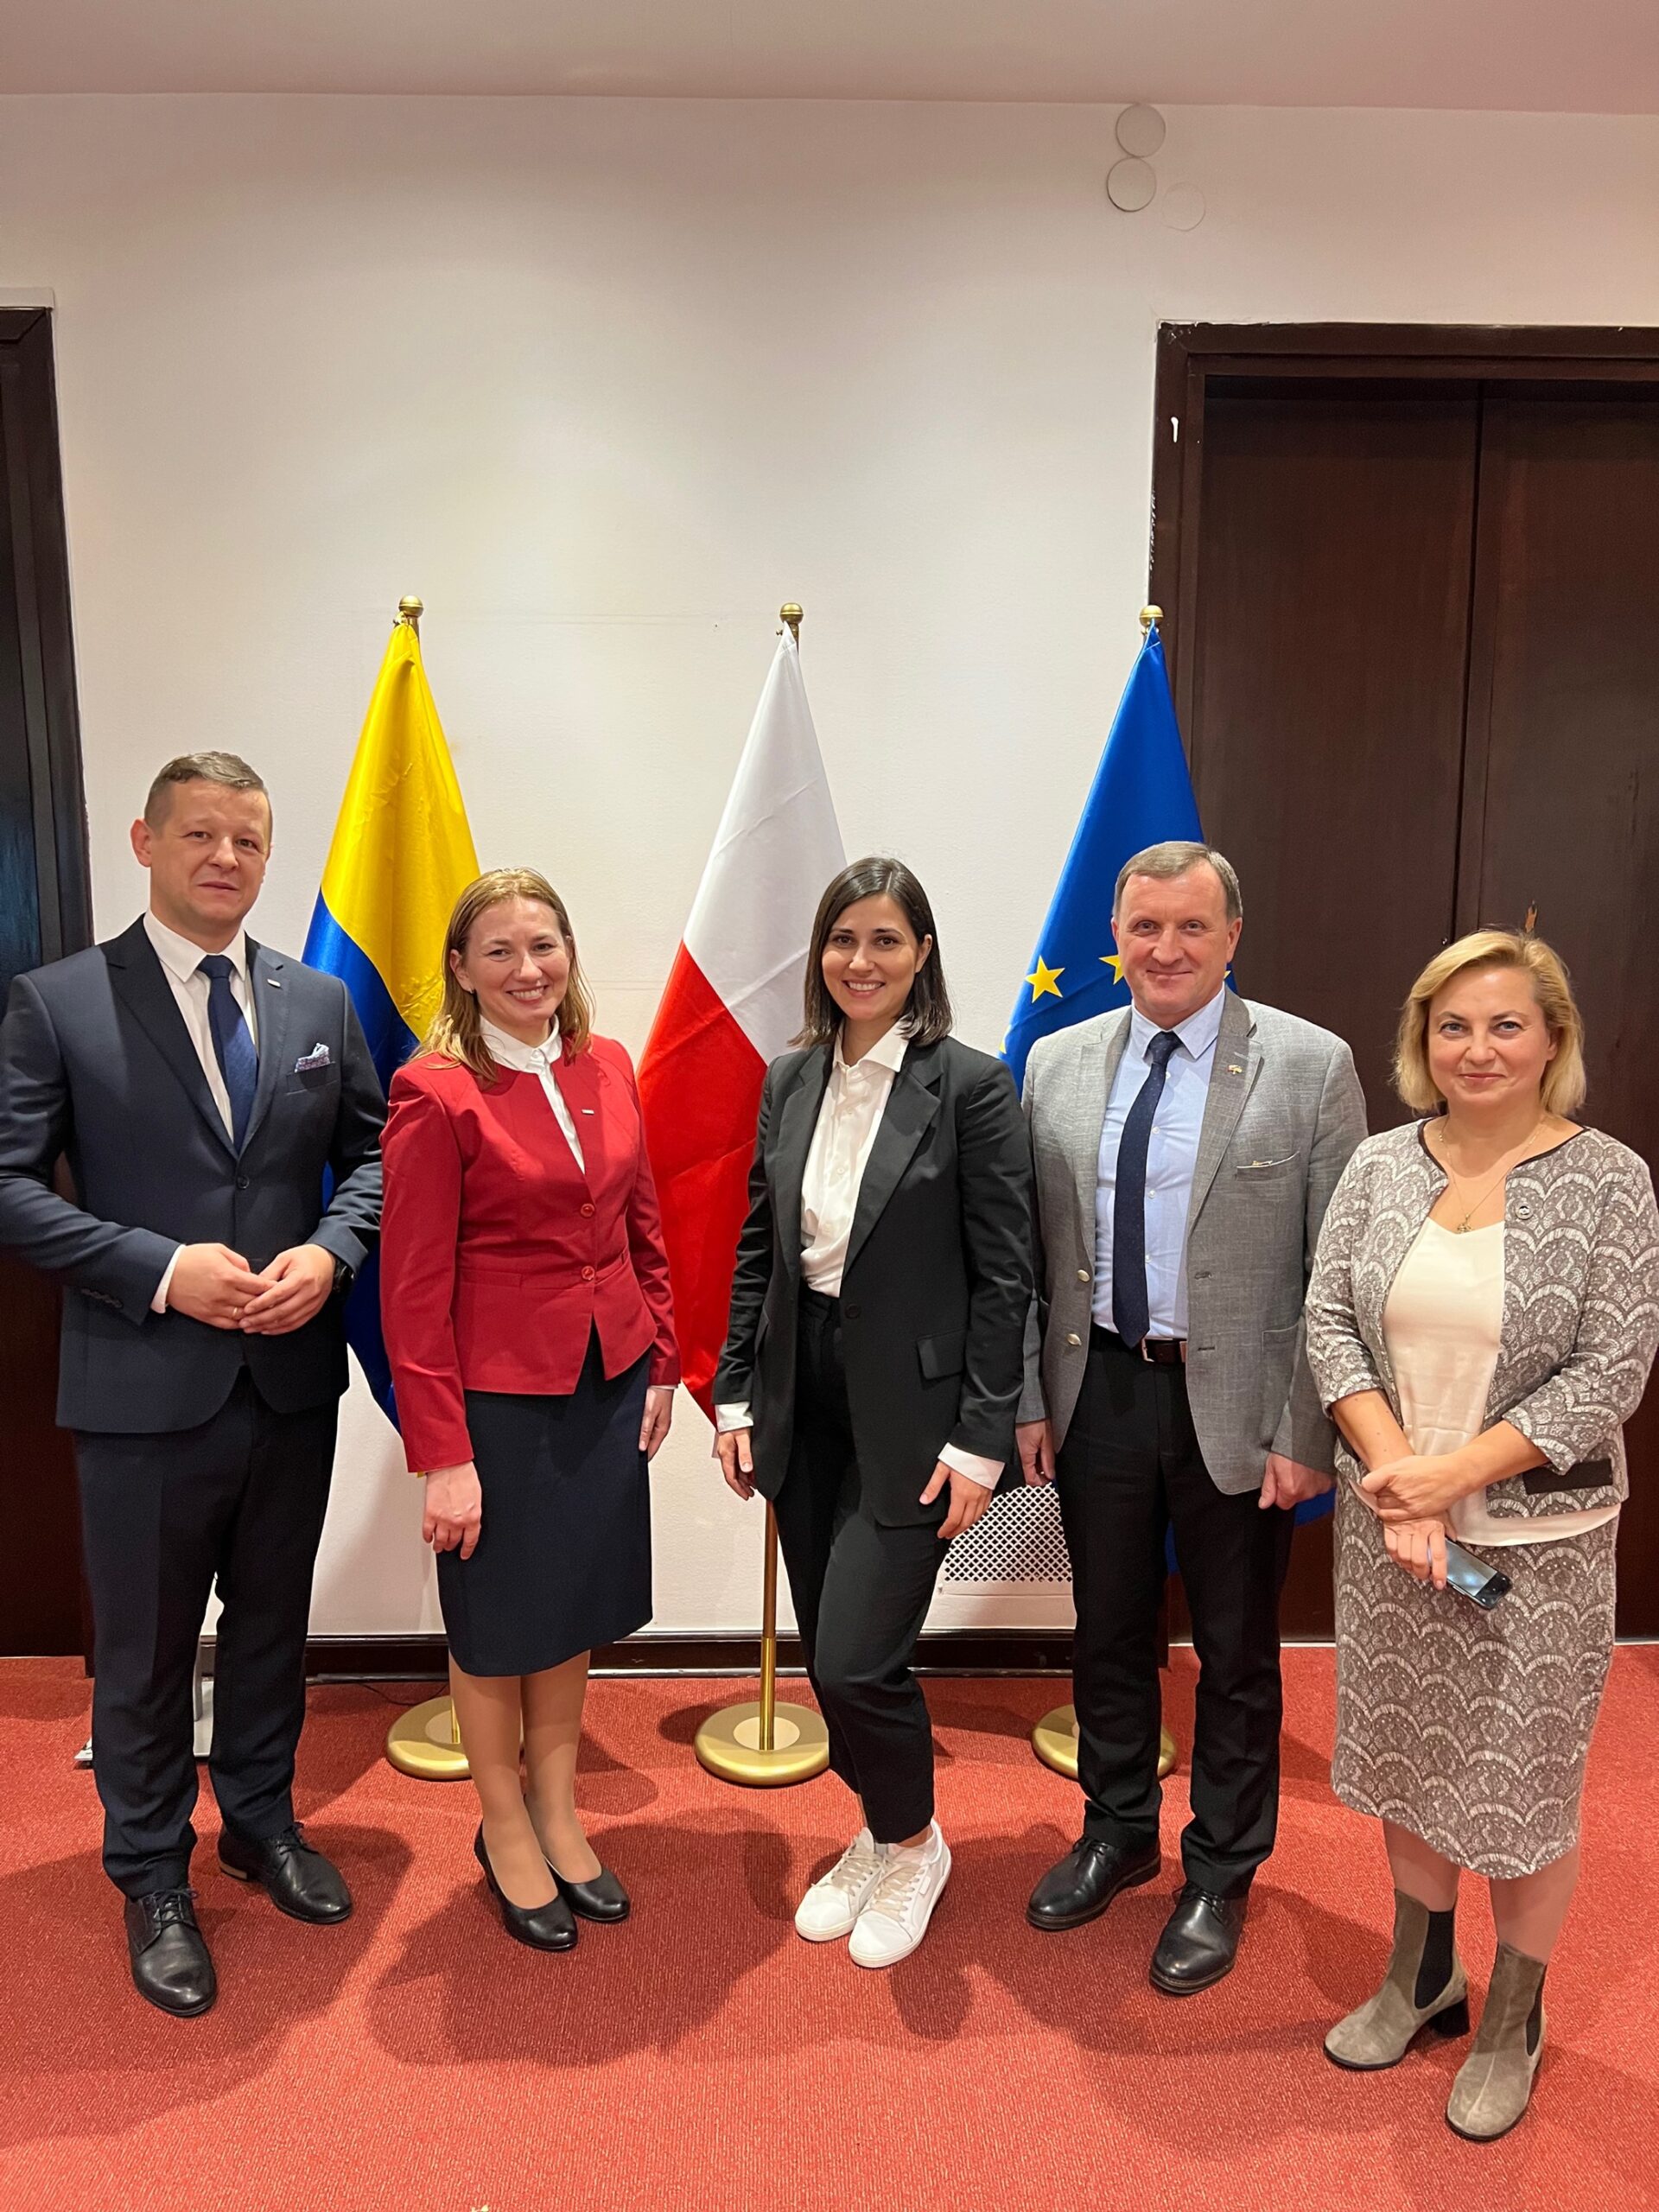 Relocation, investment, dialogue: business breakfasts “Work experience of Ukrainian business in Poland” and “Work experience of Polish investors in Ukraine” by PAIH took place in Warsaw